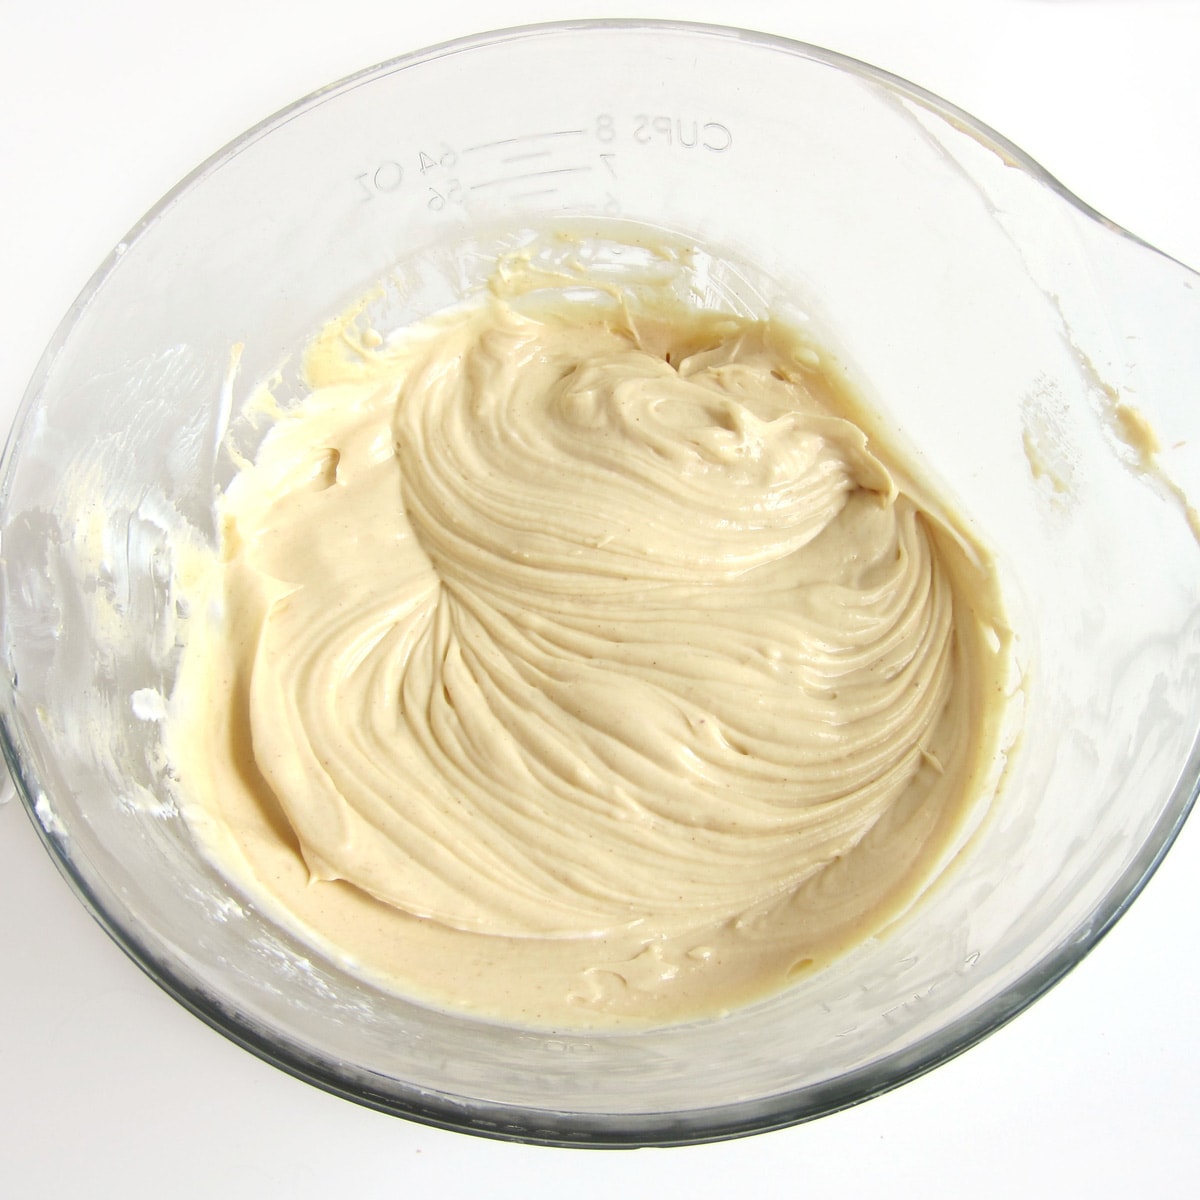 Peanut butter cheesecake filling in a mixing bowl.